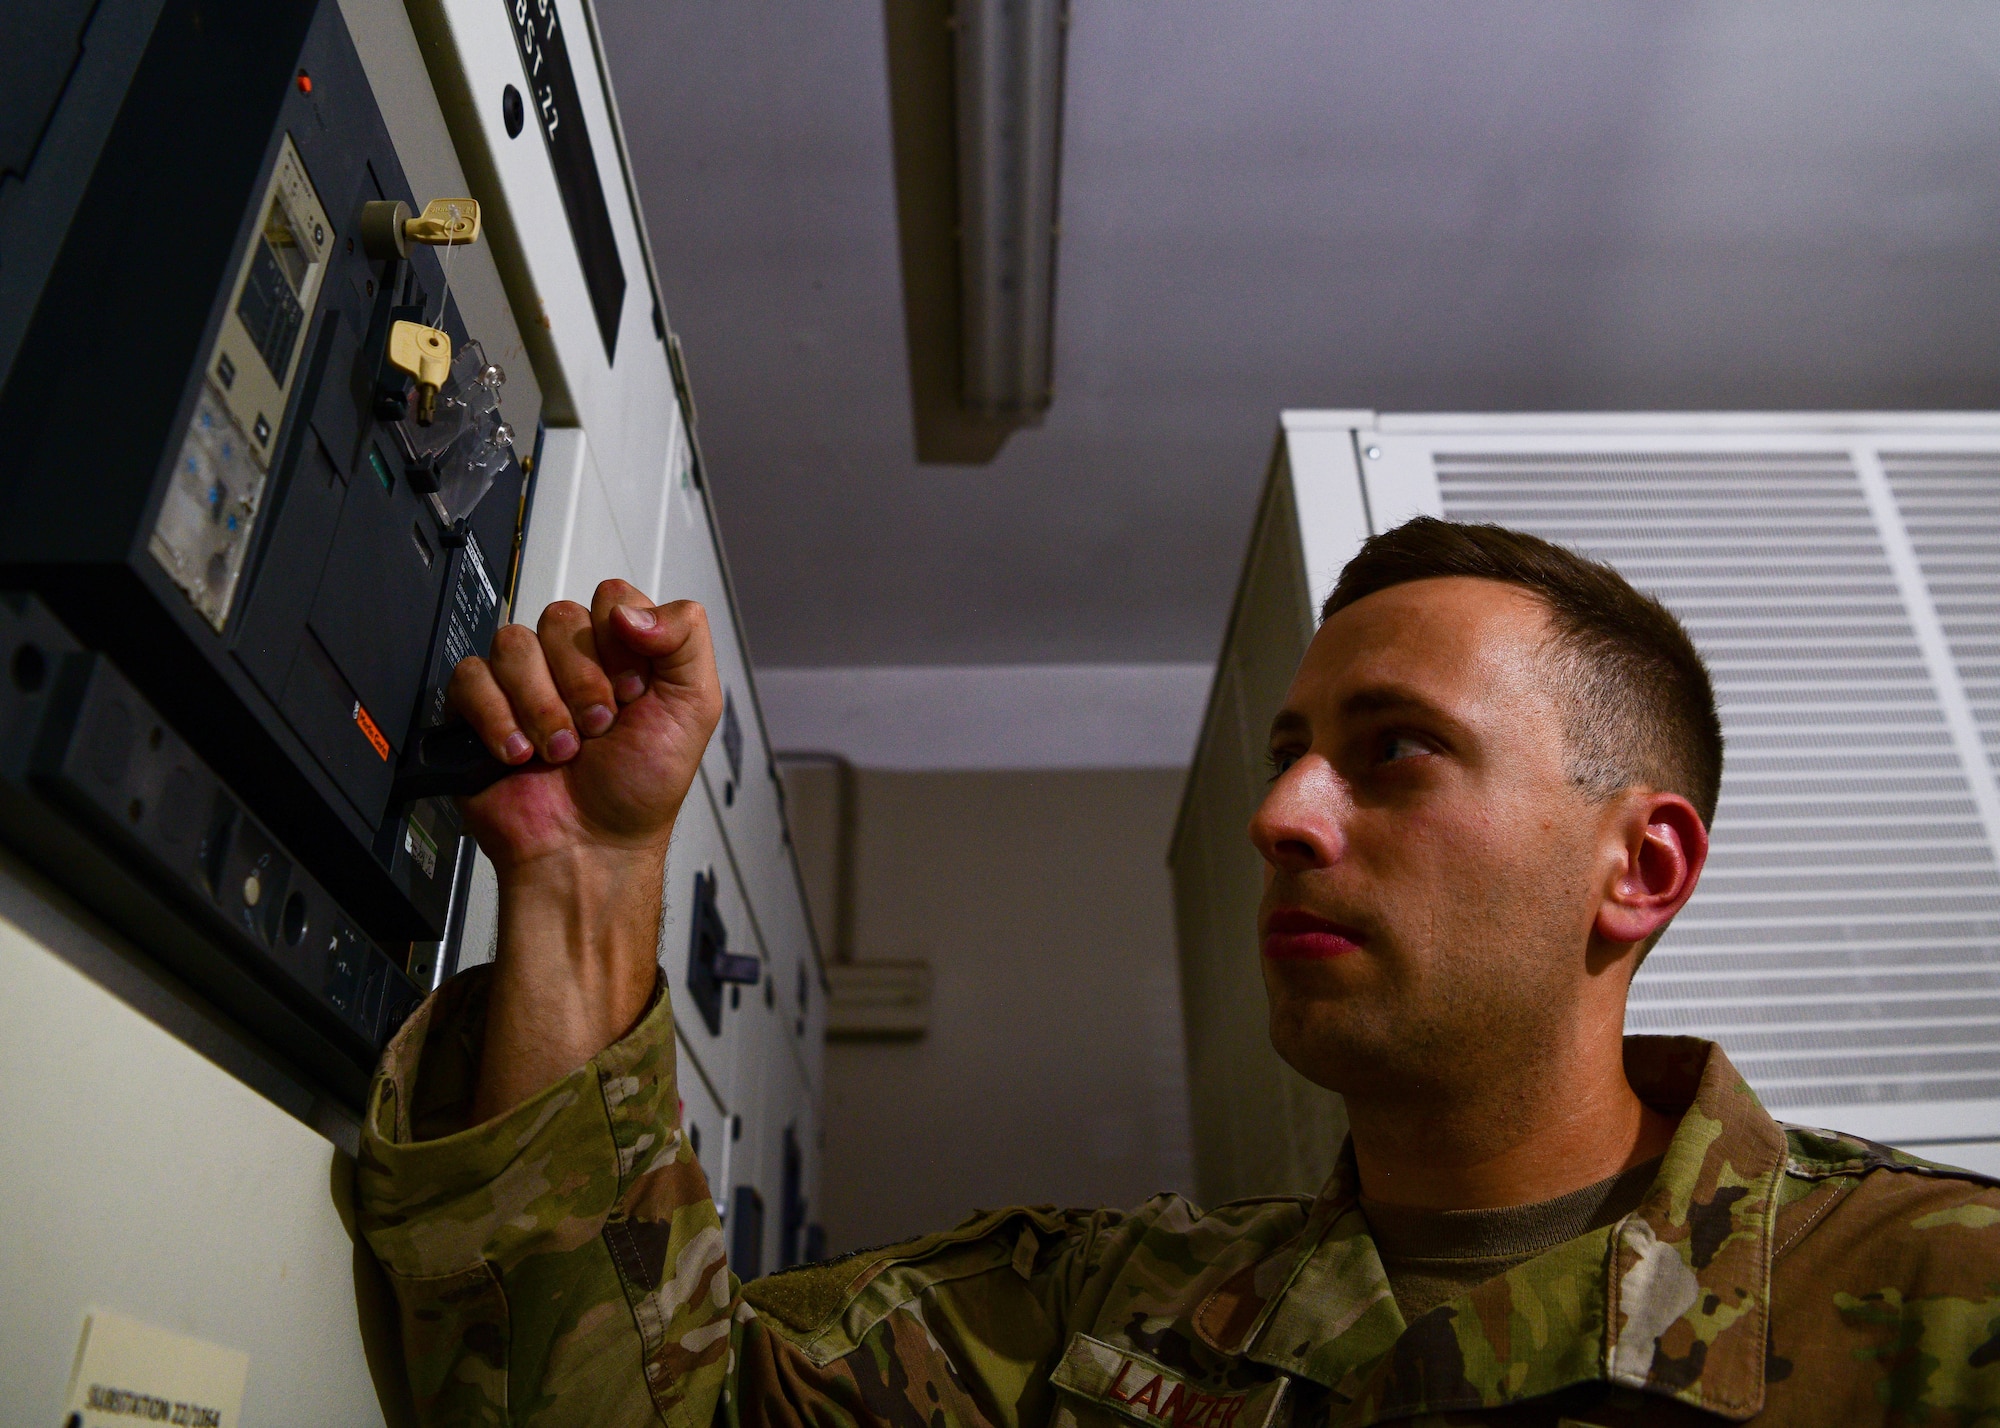 Tech. Sgt. Jacob Lanzer, Civil Engineer Maintenance, Inspection and Repair Team craftsman from Travis Air Force Base, California, exercises a charging handle on a low voltage circuit breaker during routine maintenance at Aviano Air Base, Italy, June 21, 2022. Operating the charging handle charges the spring in the breaker that allows the breaker to operate. (U.S. Air Force photo by Senior Airman Brooke Moeder)